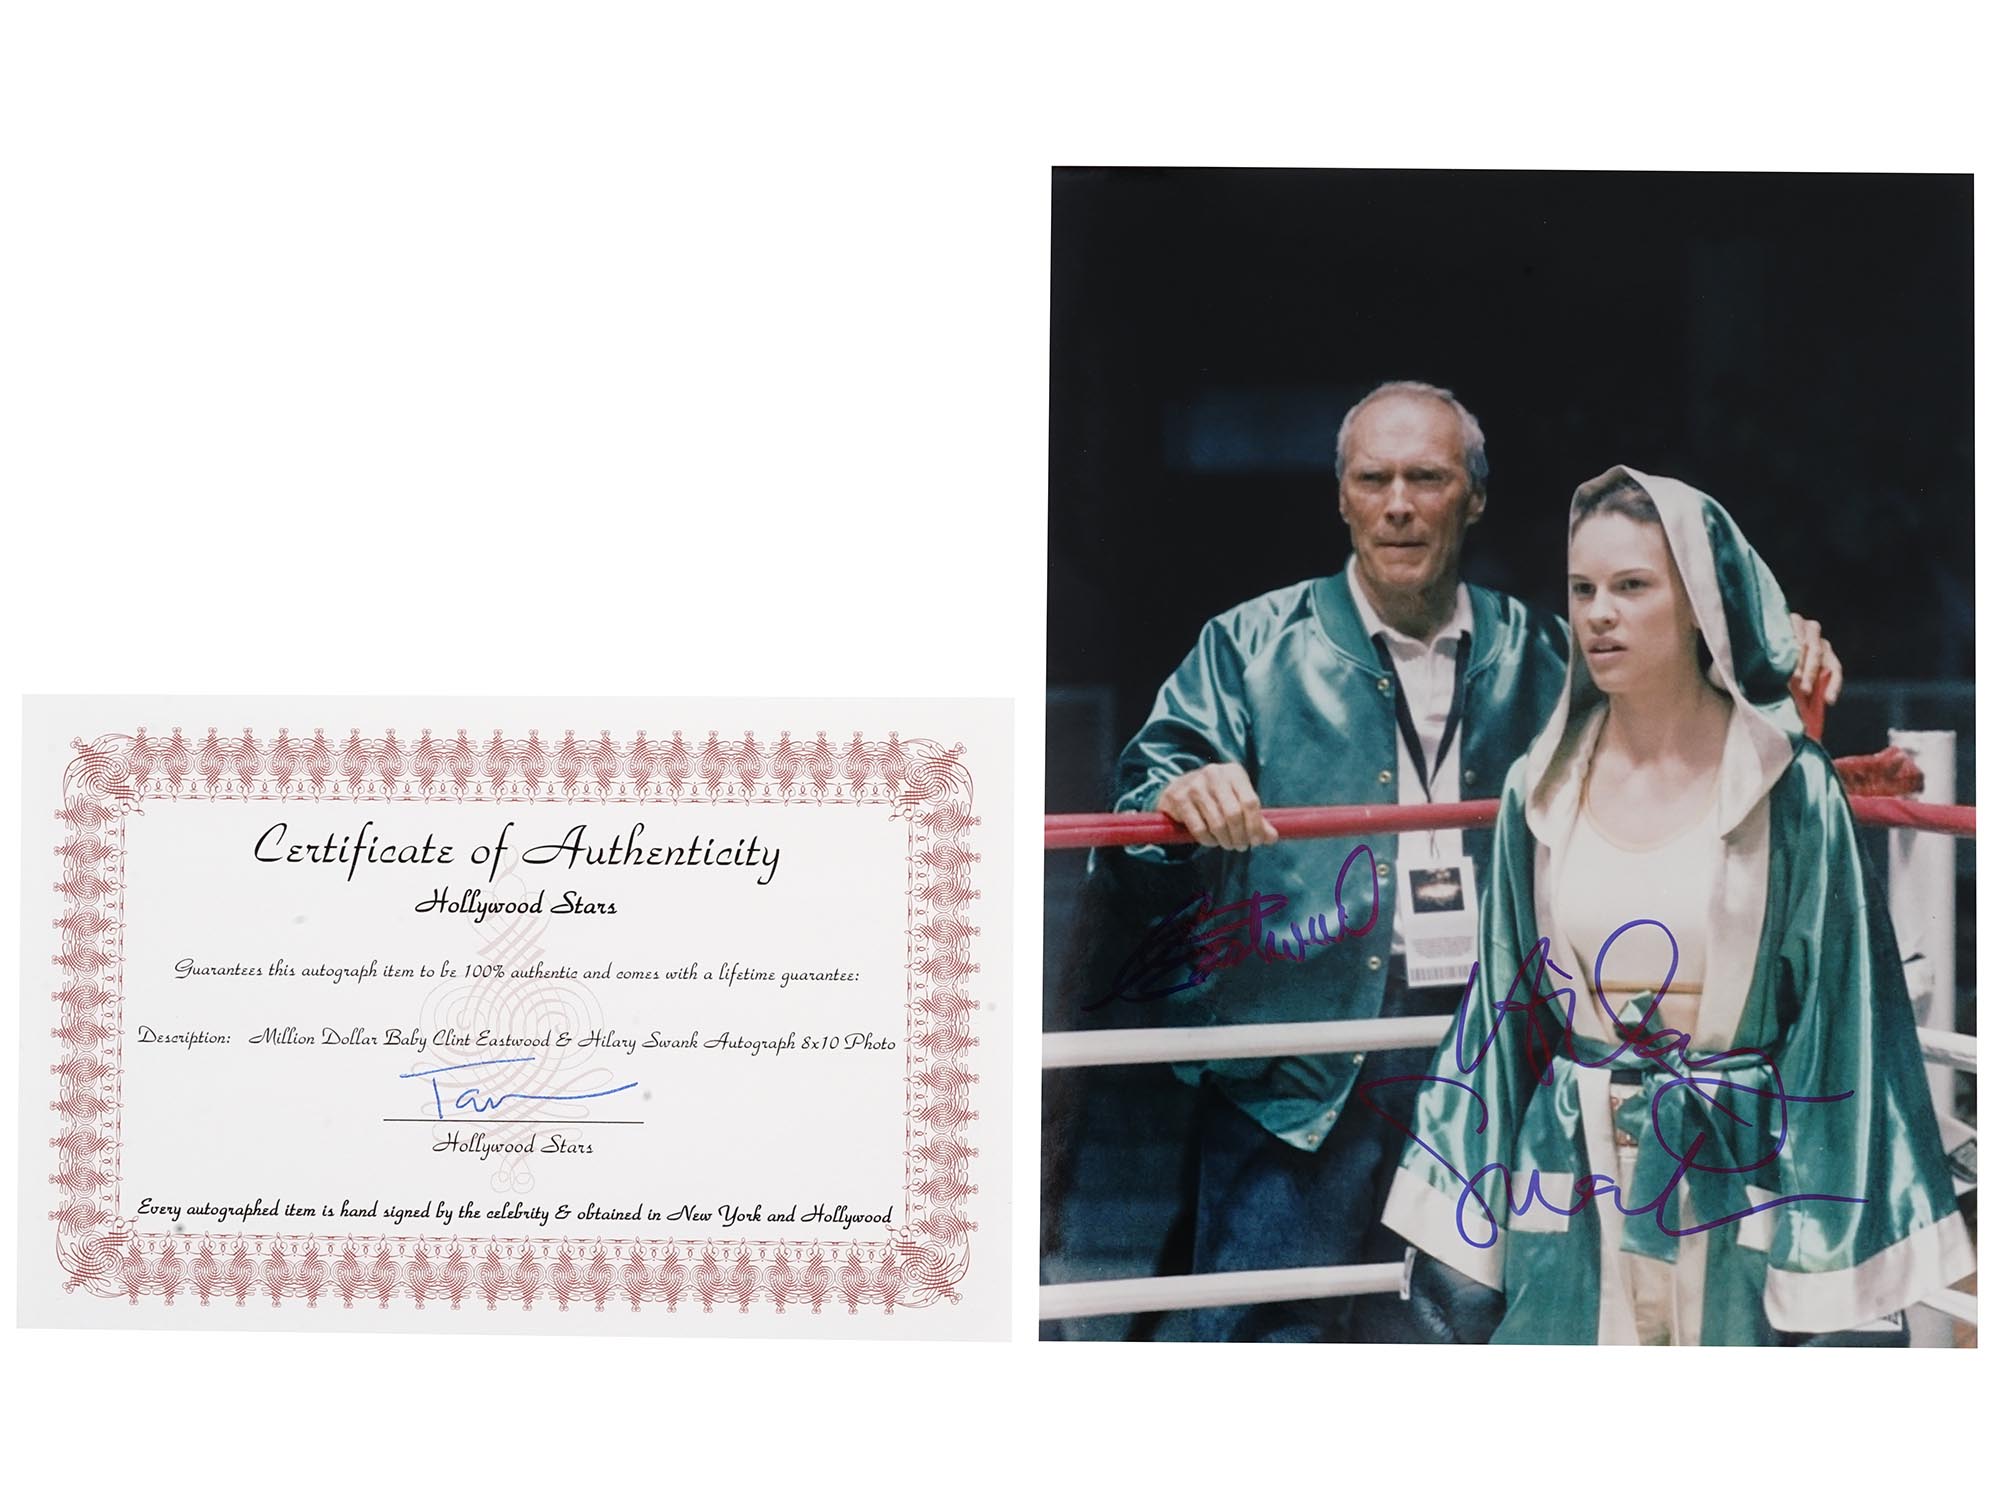 CLINT EASTWOOD AND HILARY SWANK AUTOGRAPHED PHOTO PIC-0